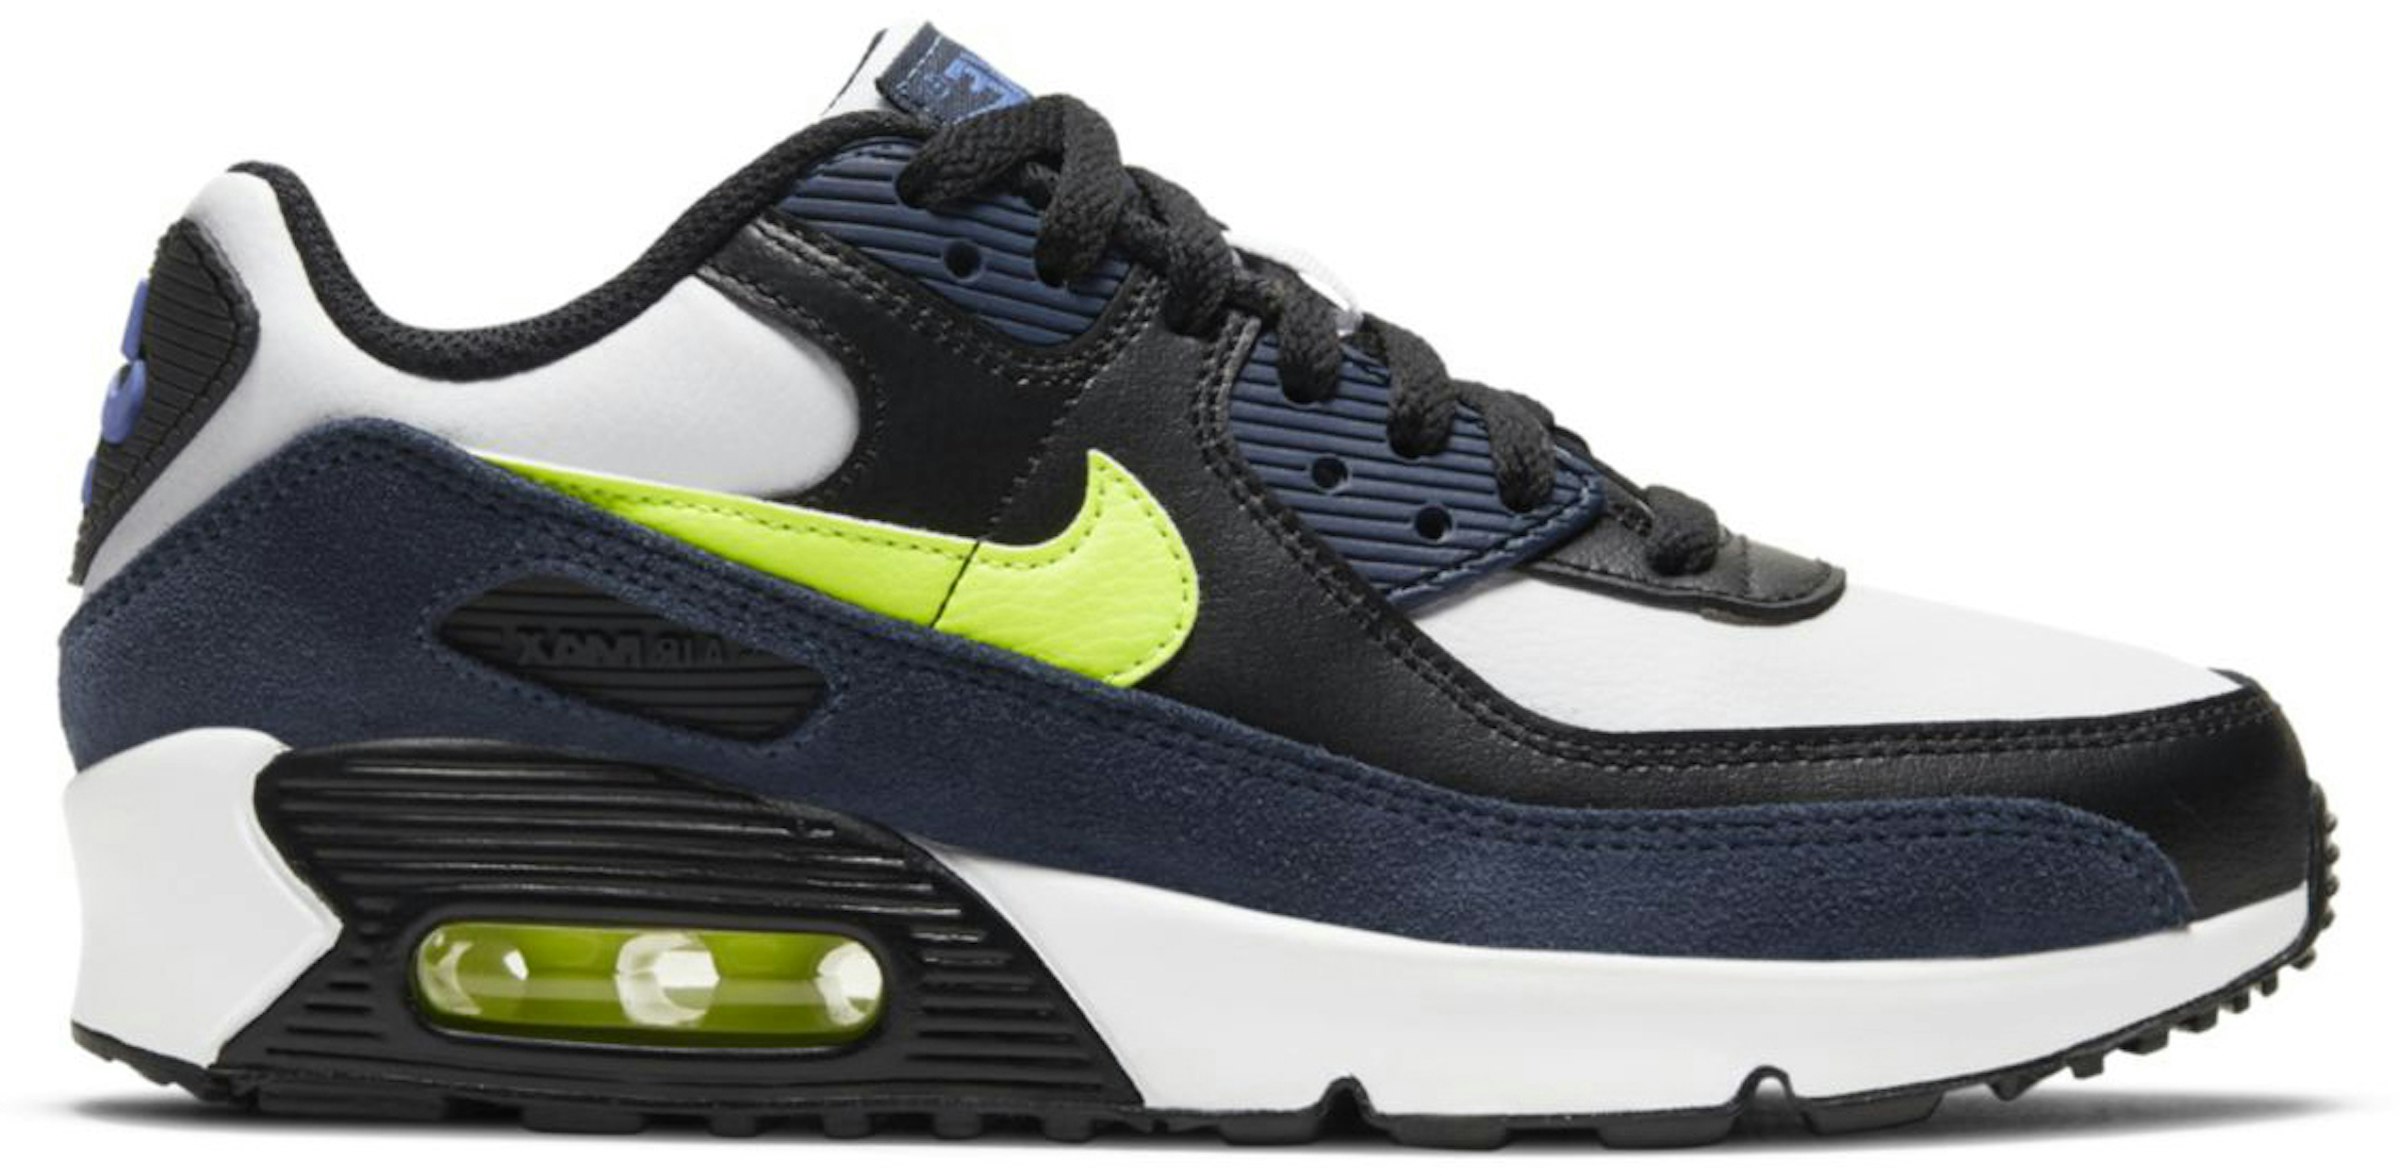 Nike Air 90 Leather Midnight Navy Volt (GS) Kids' - CD6864-401 - US